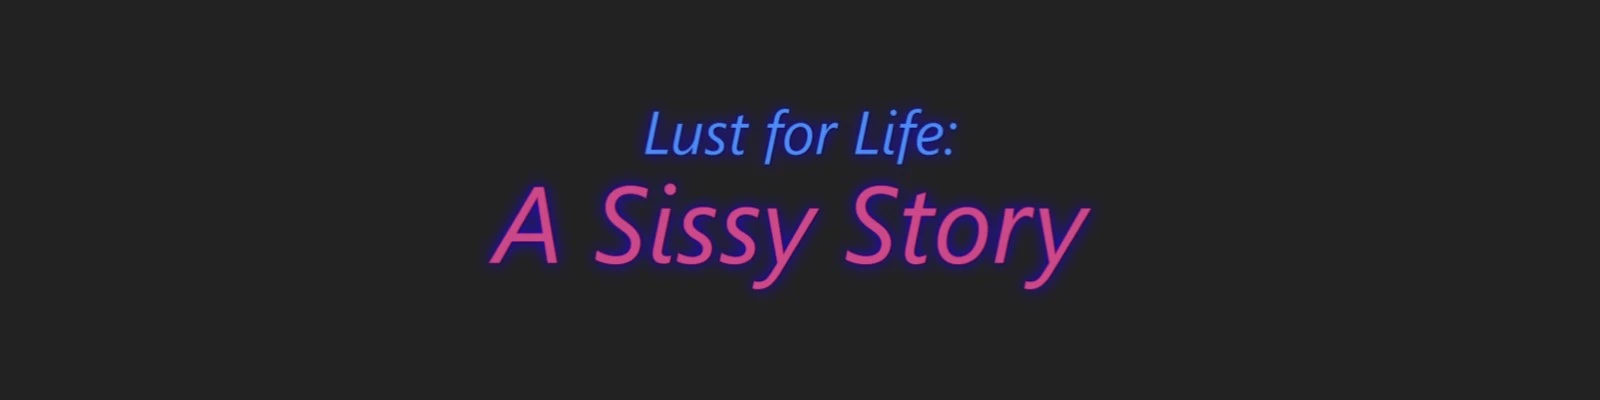 Lust for Life: A Sissy Story main image